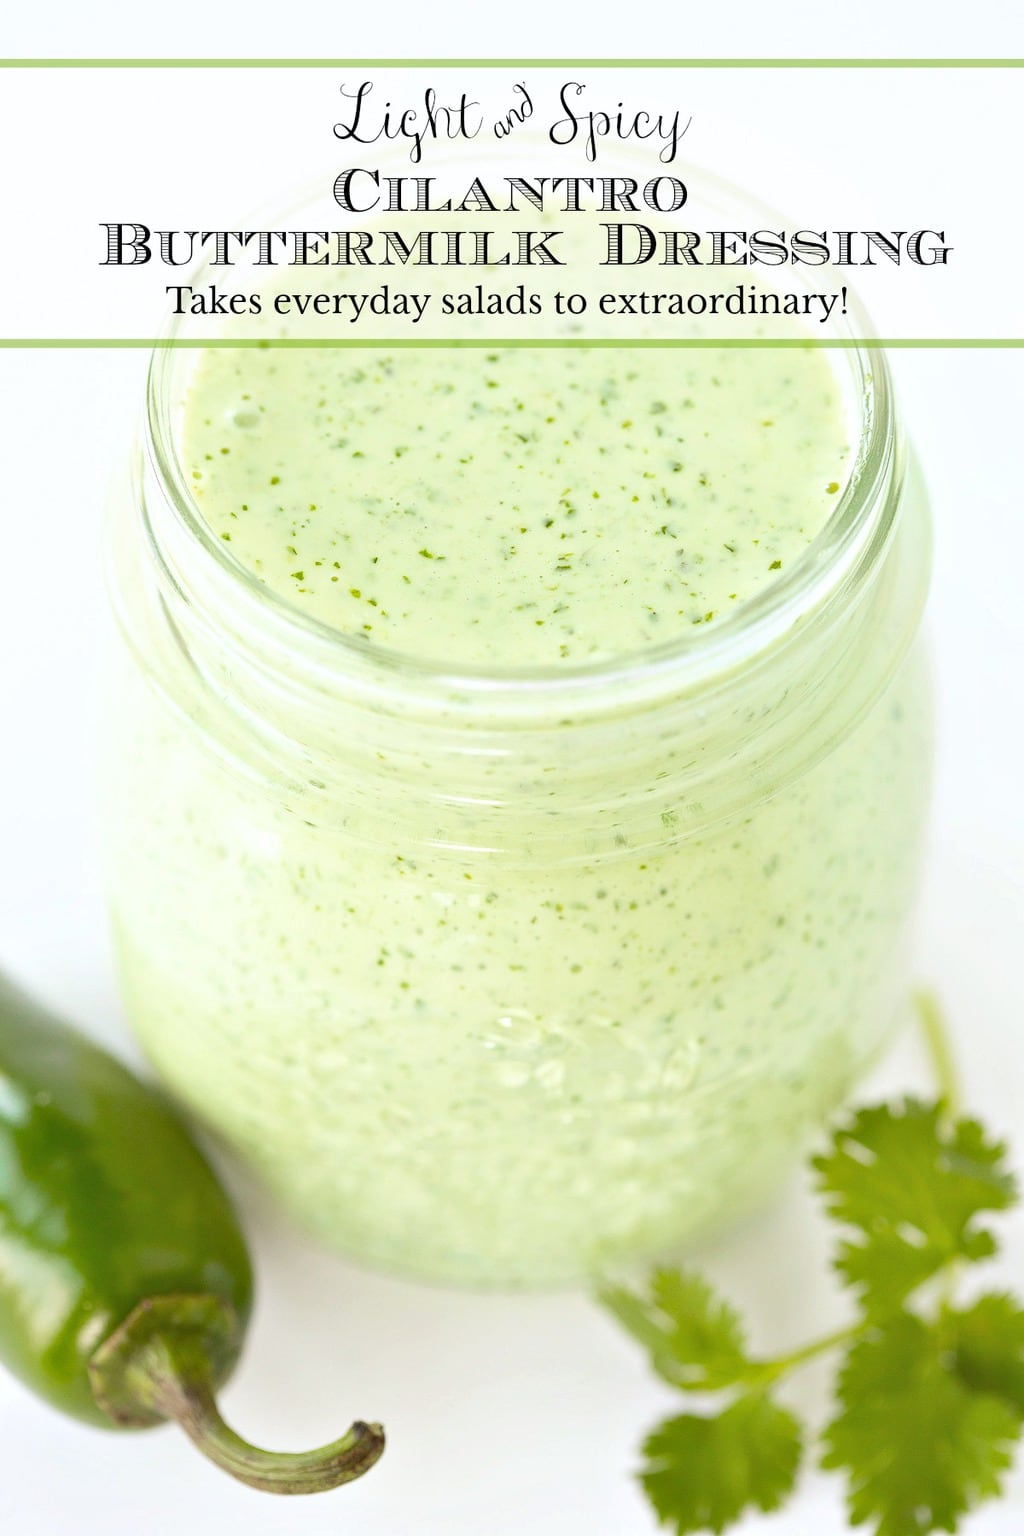 Light and Spicy Cilantro Buttermilk Dressing